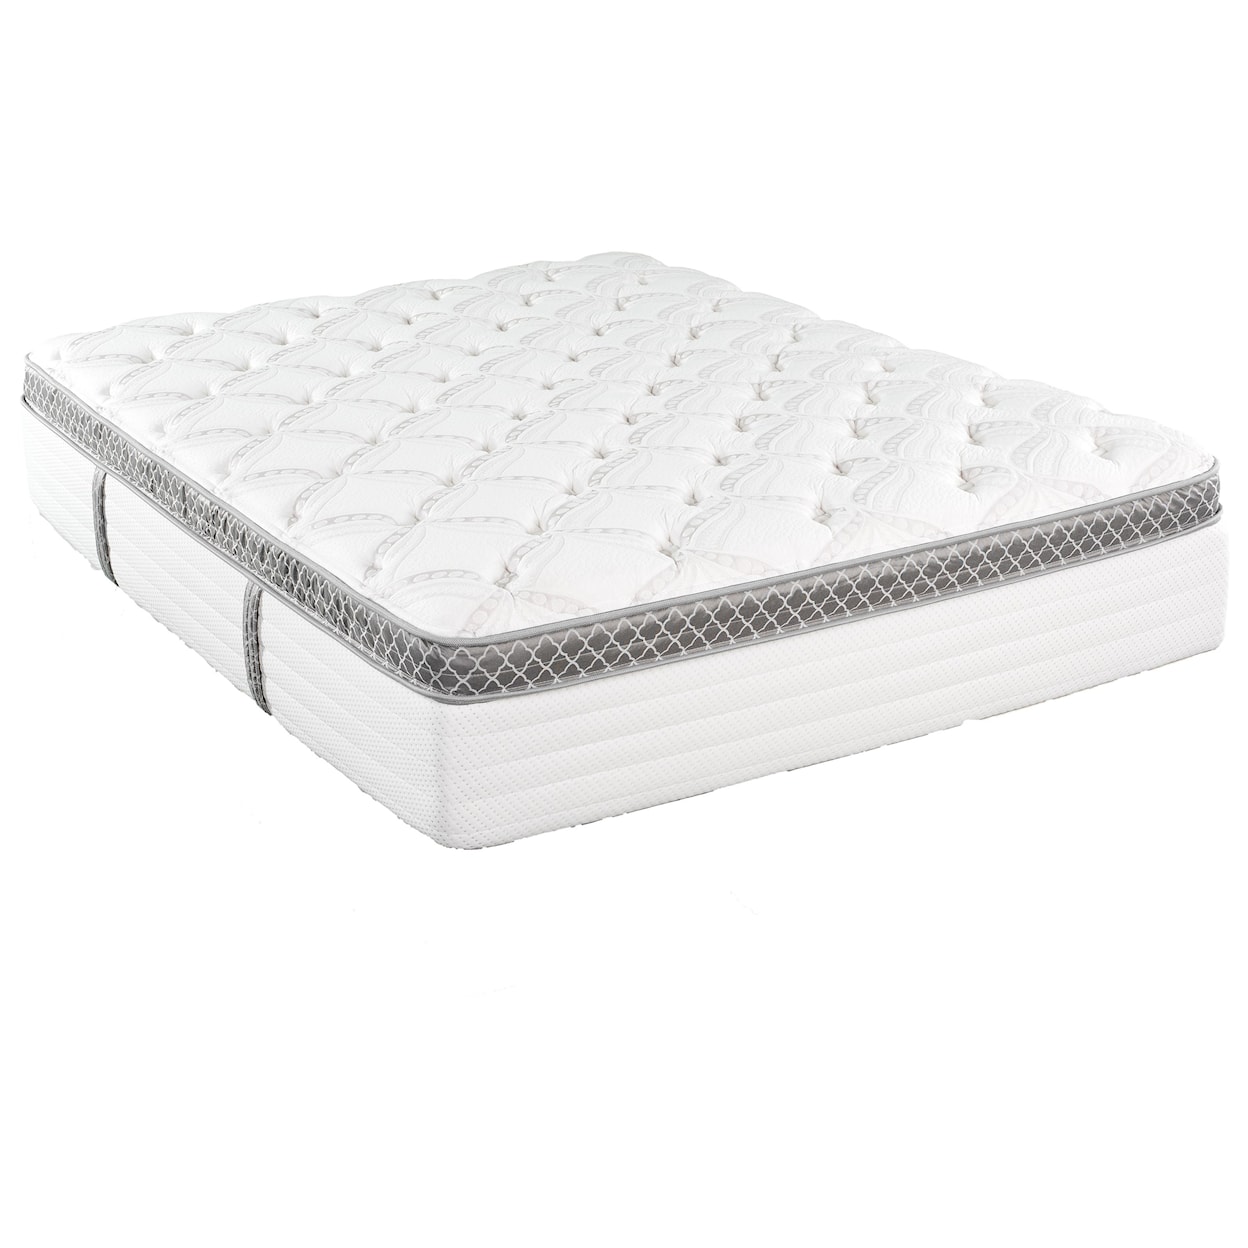 King Koil Madelyn Pillow Top King Pillow Top Pocketed Coil Mattress